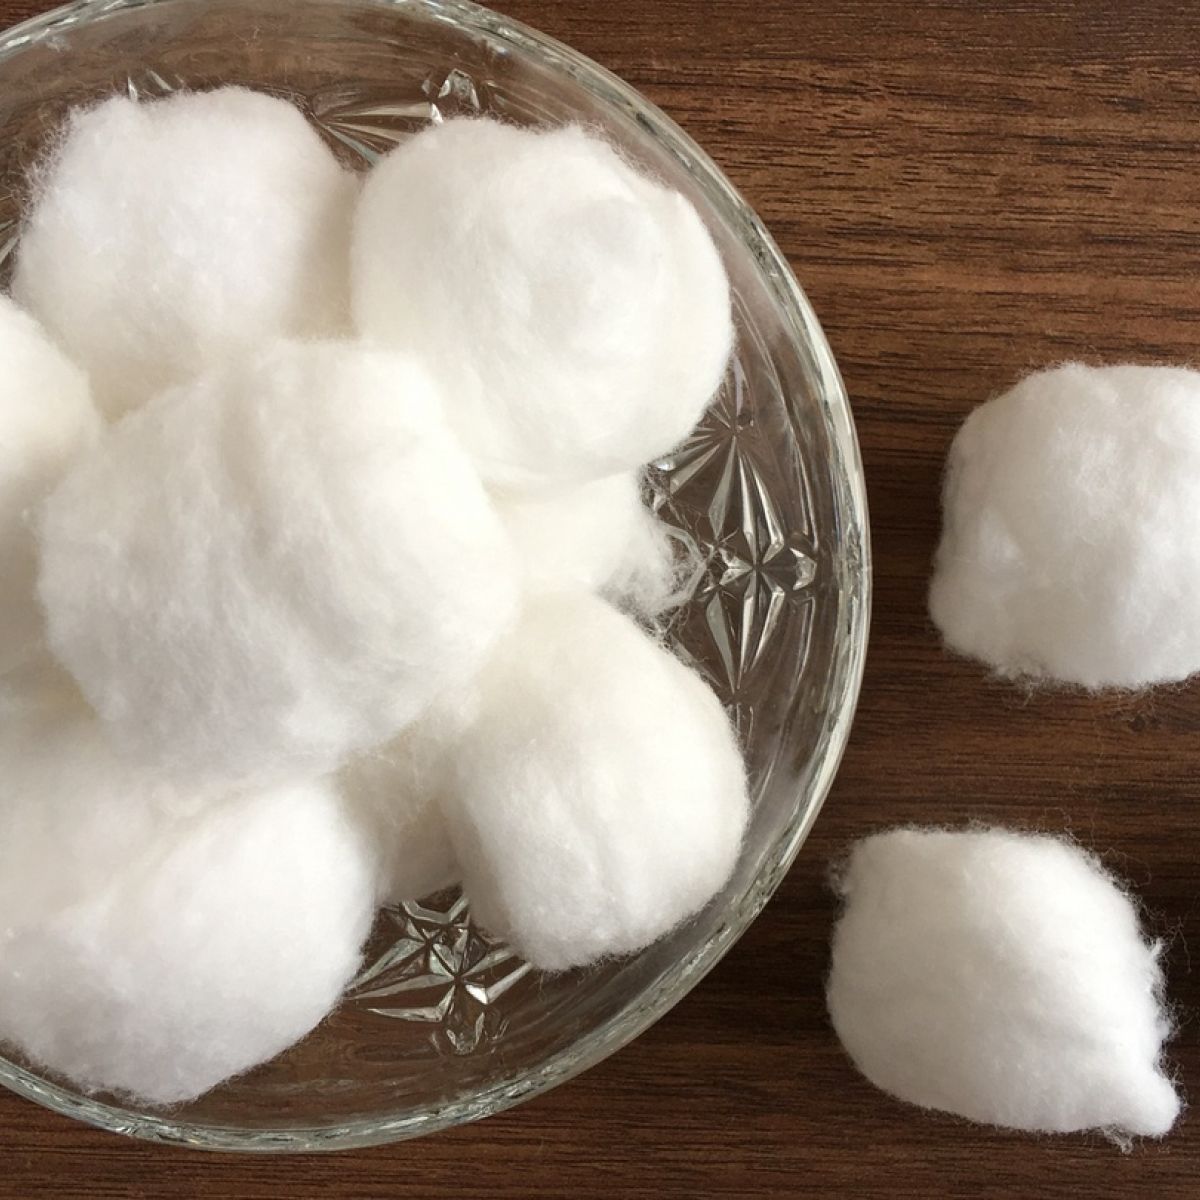 Cotton wool: It's natural.